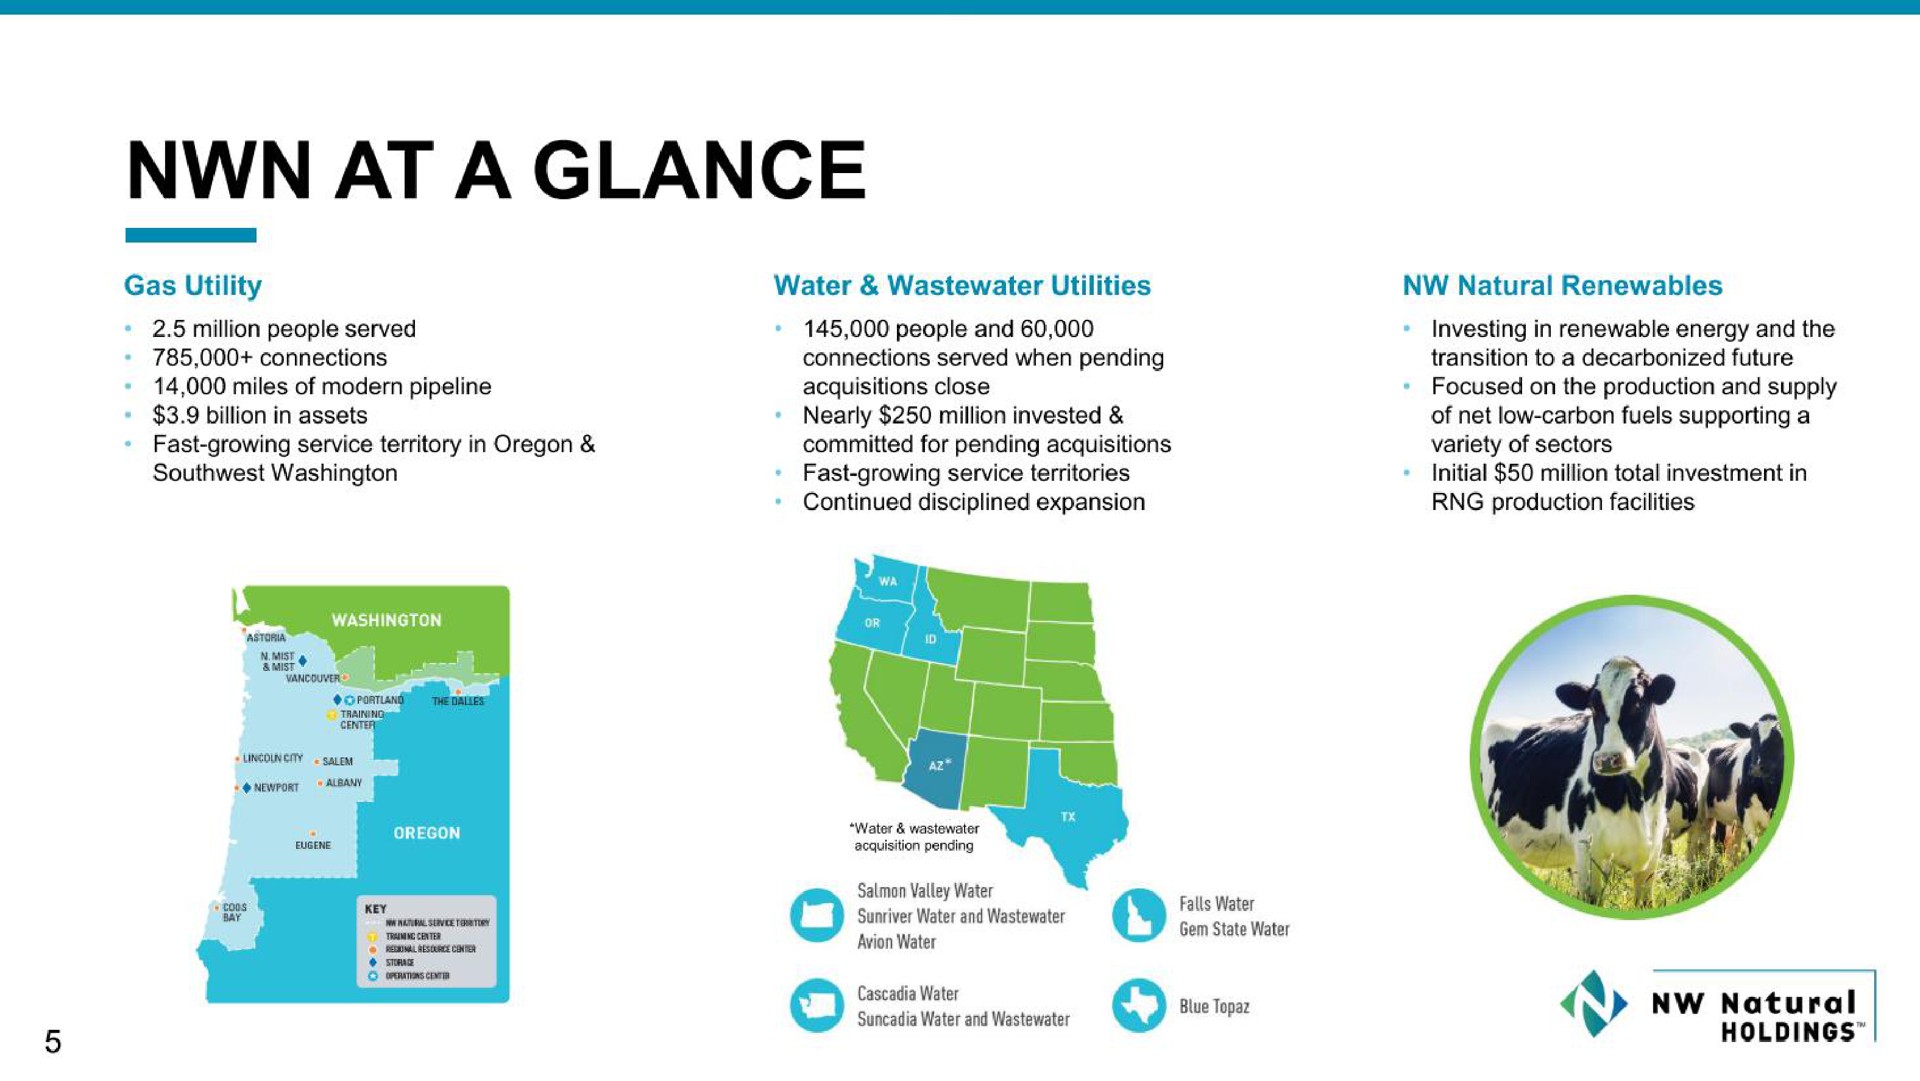 at a glance | NW Natural Holdings